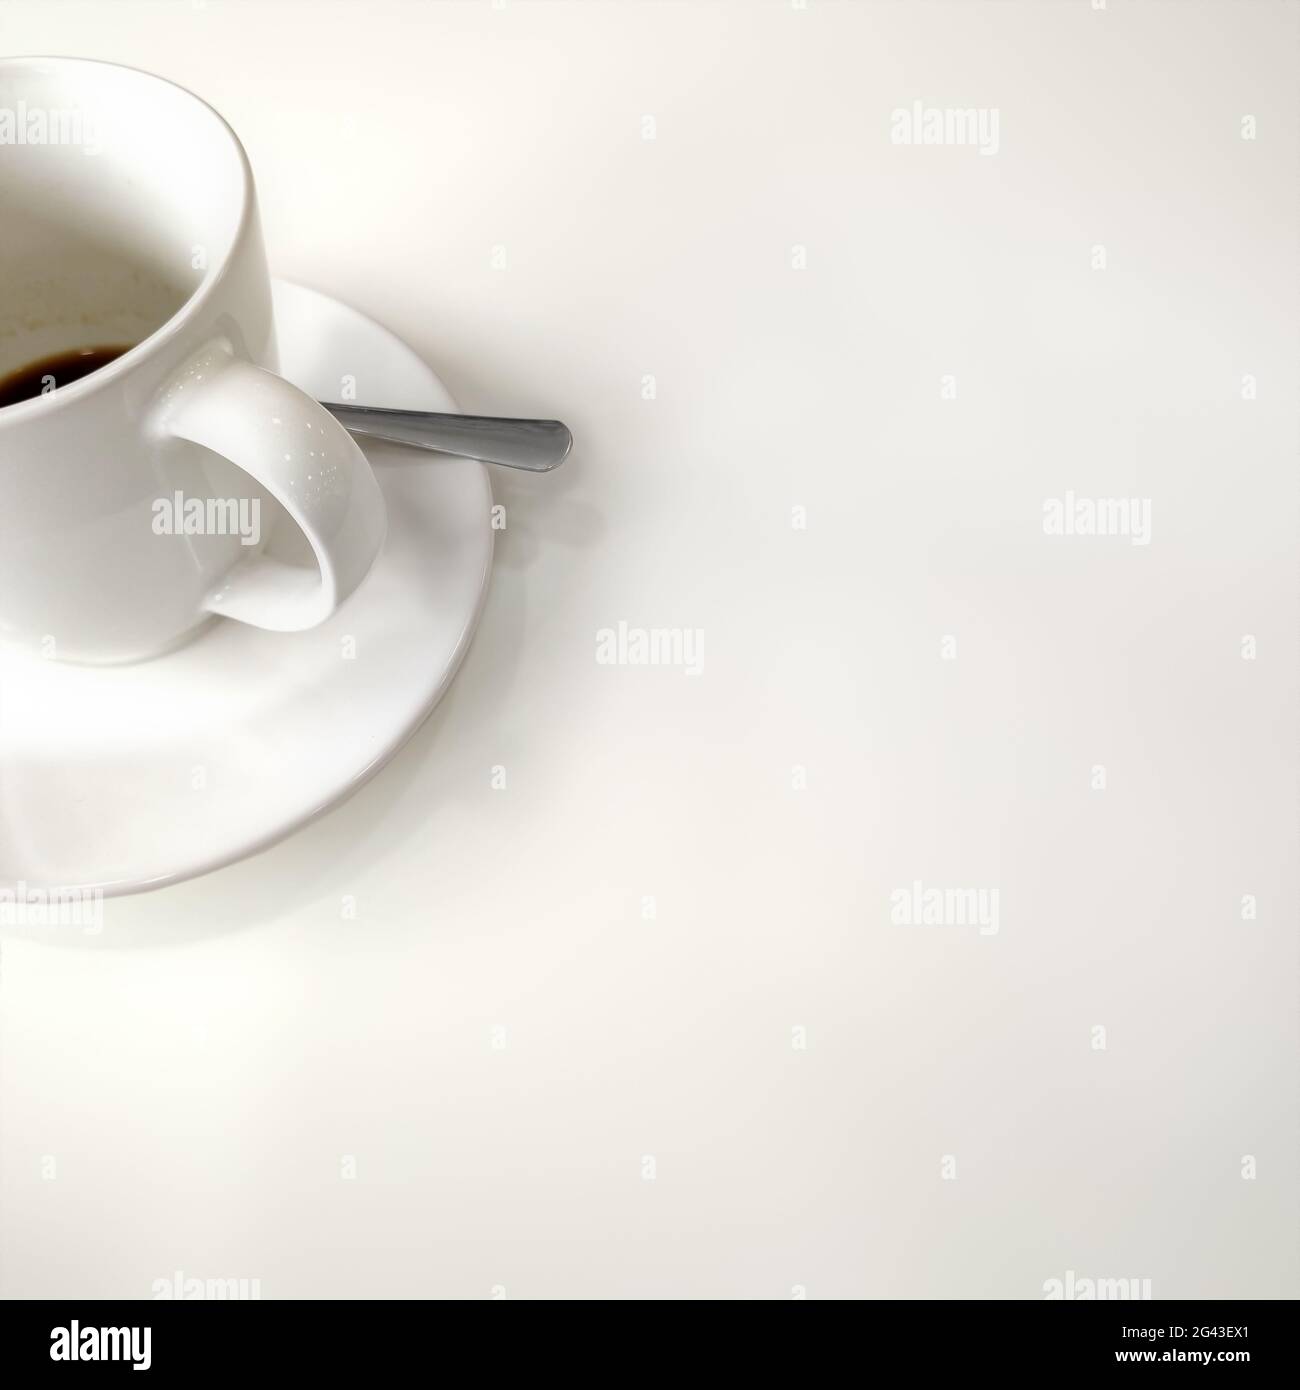 Finished cup of coffe white background Stock Photo